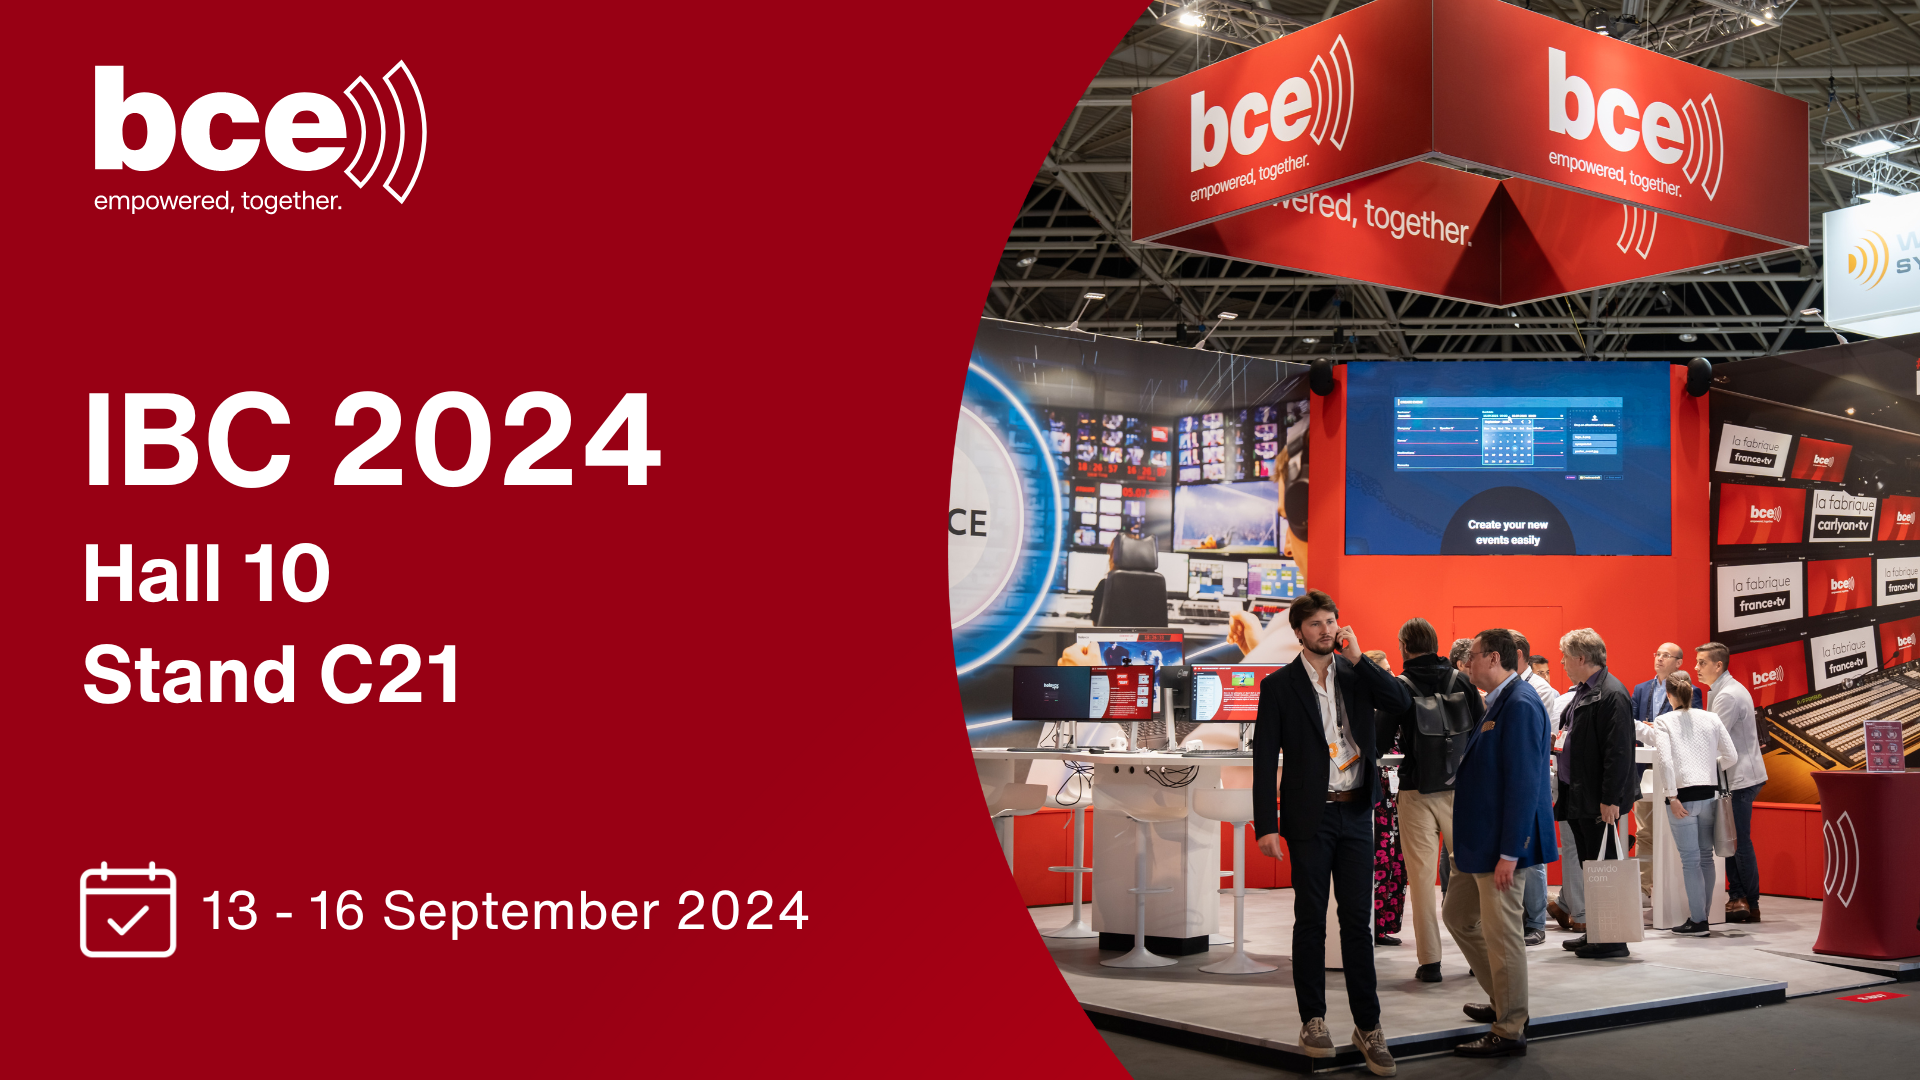 Information about IBC: Hall 10, Stand C21, from 13th to 16th September.